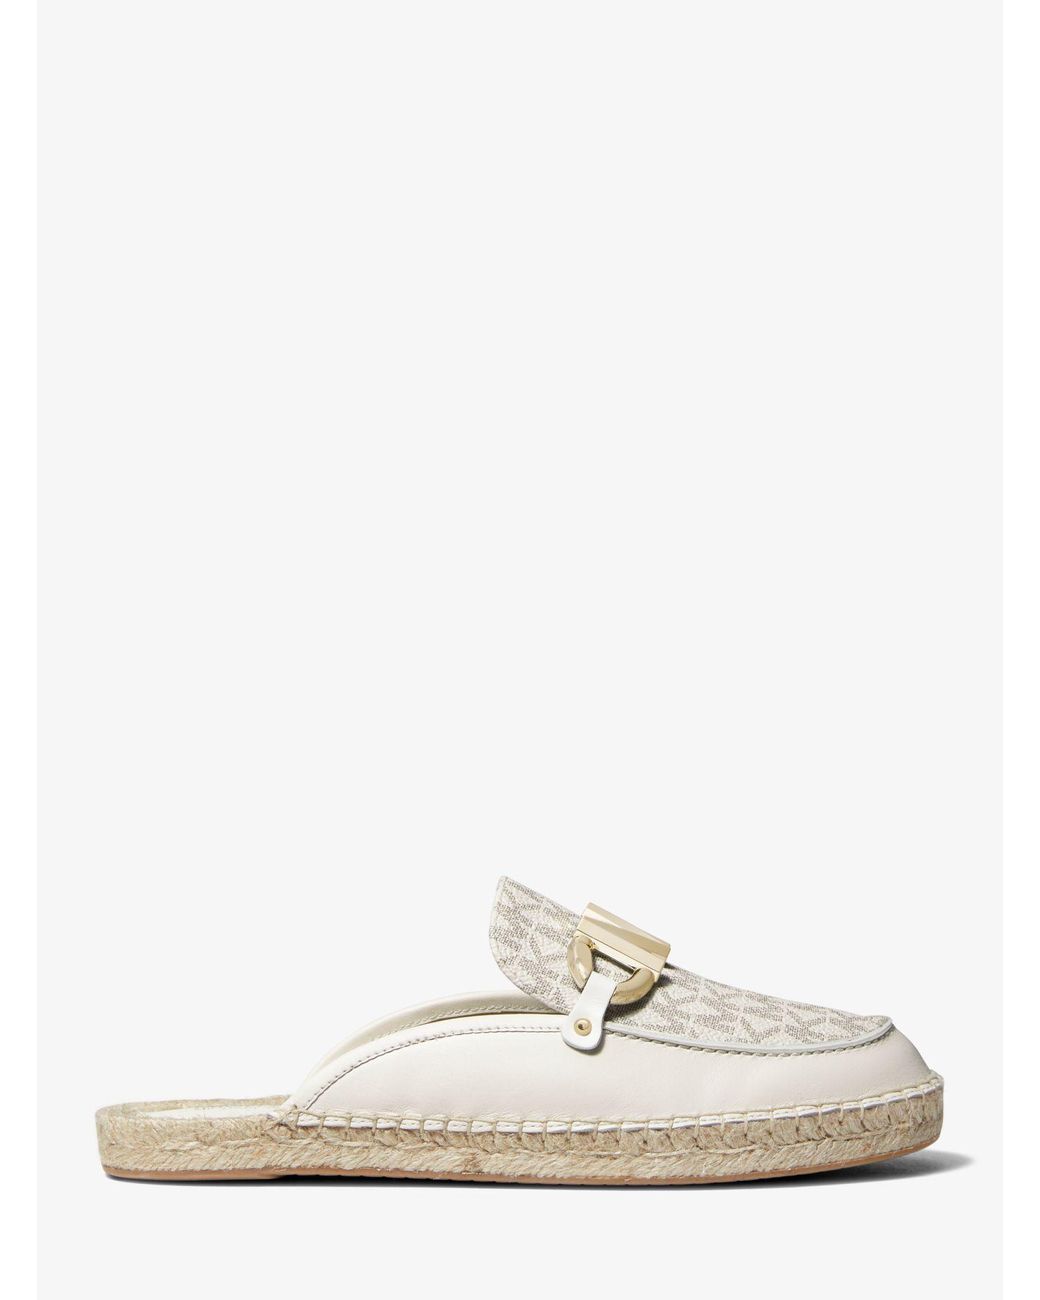 Michael Kors Izzy Logo And Leather Loafer Slide in White | Lyst